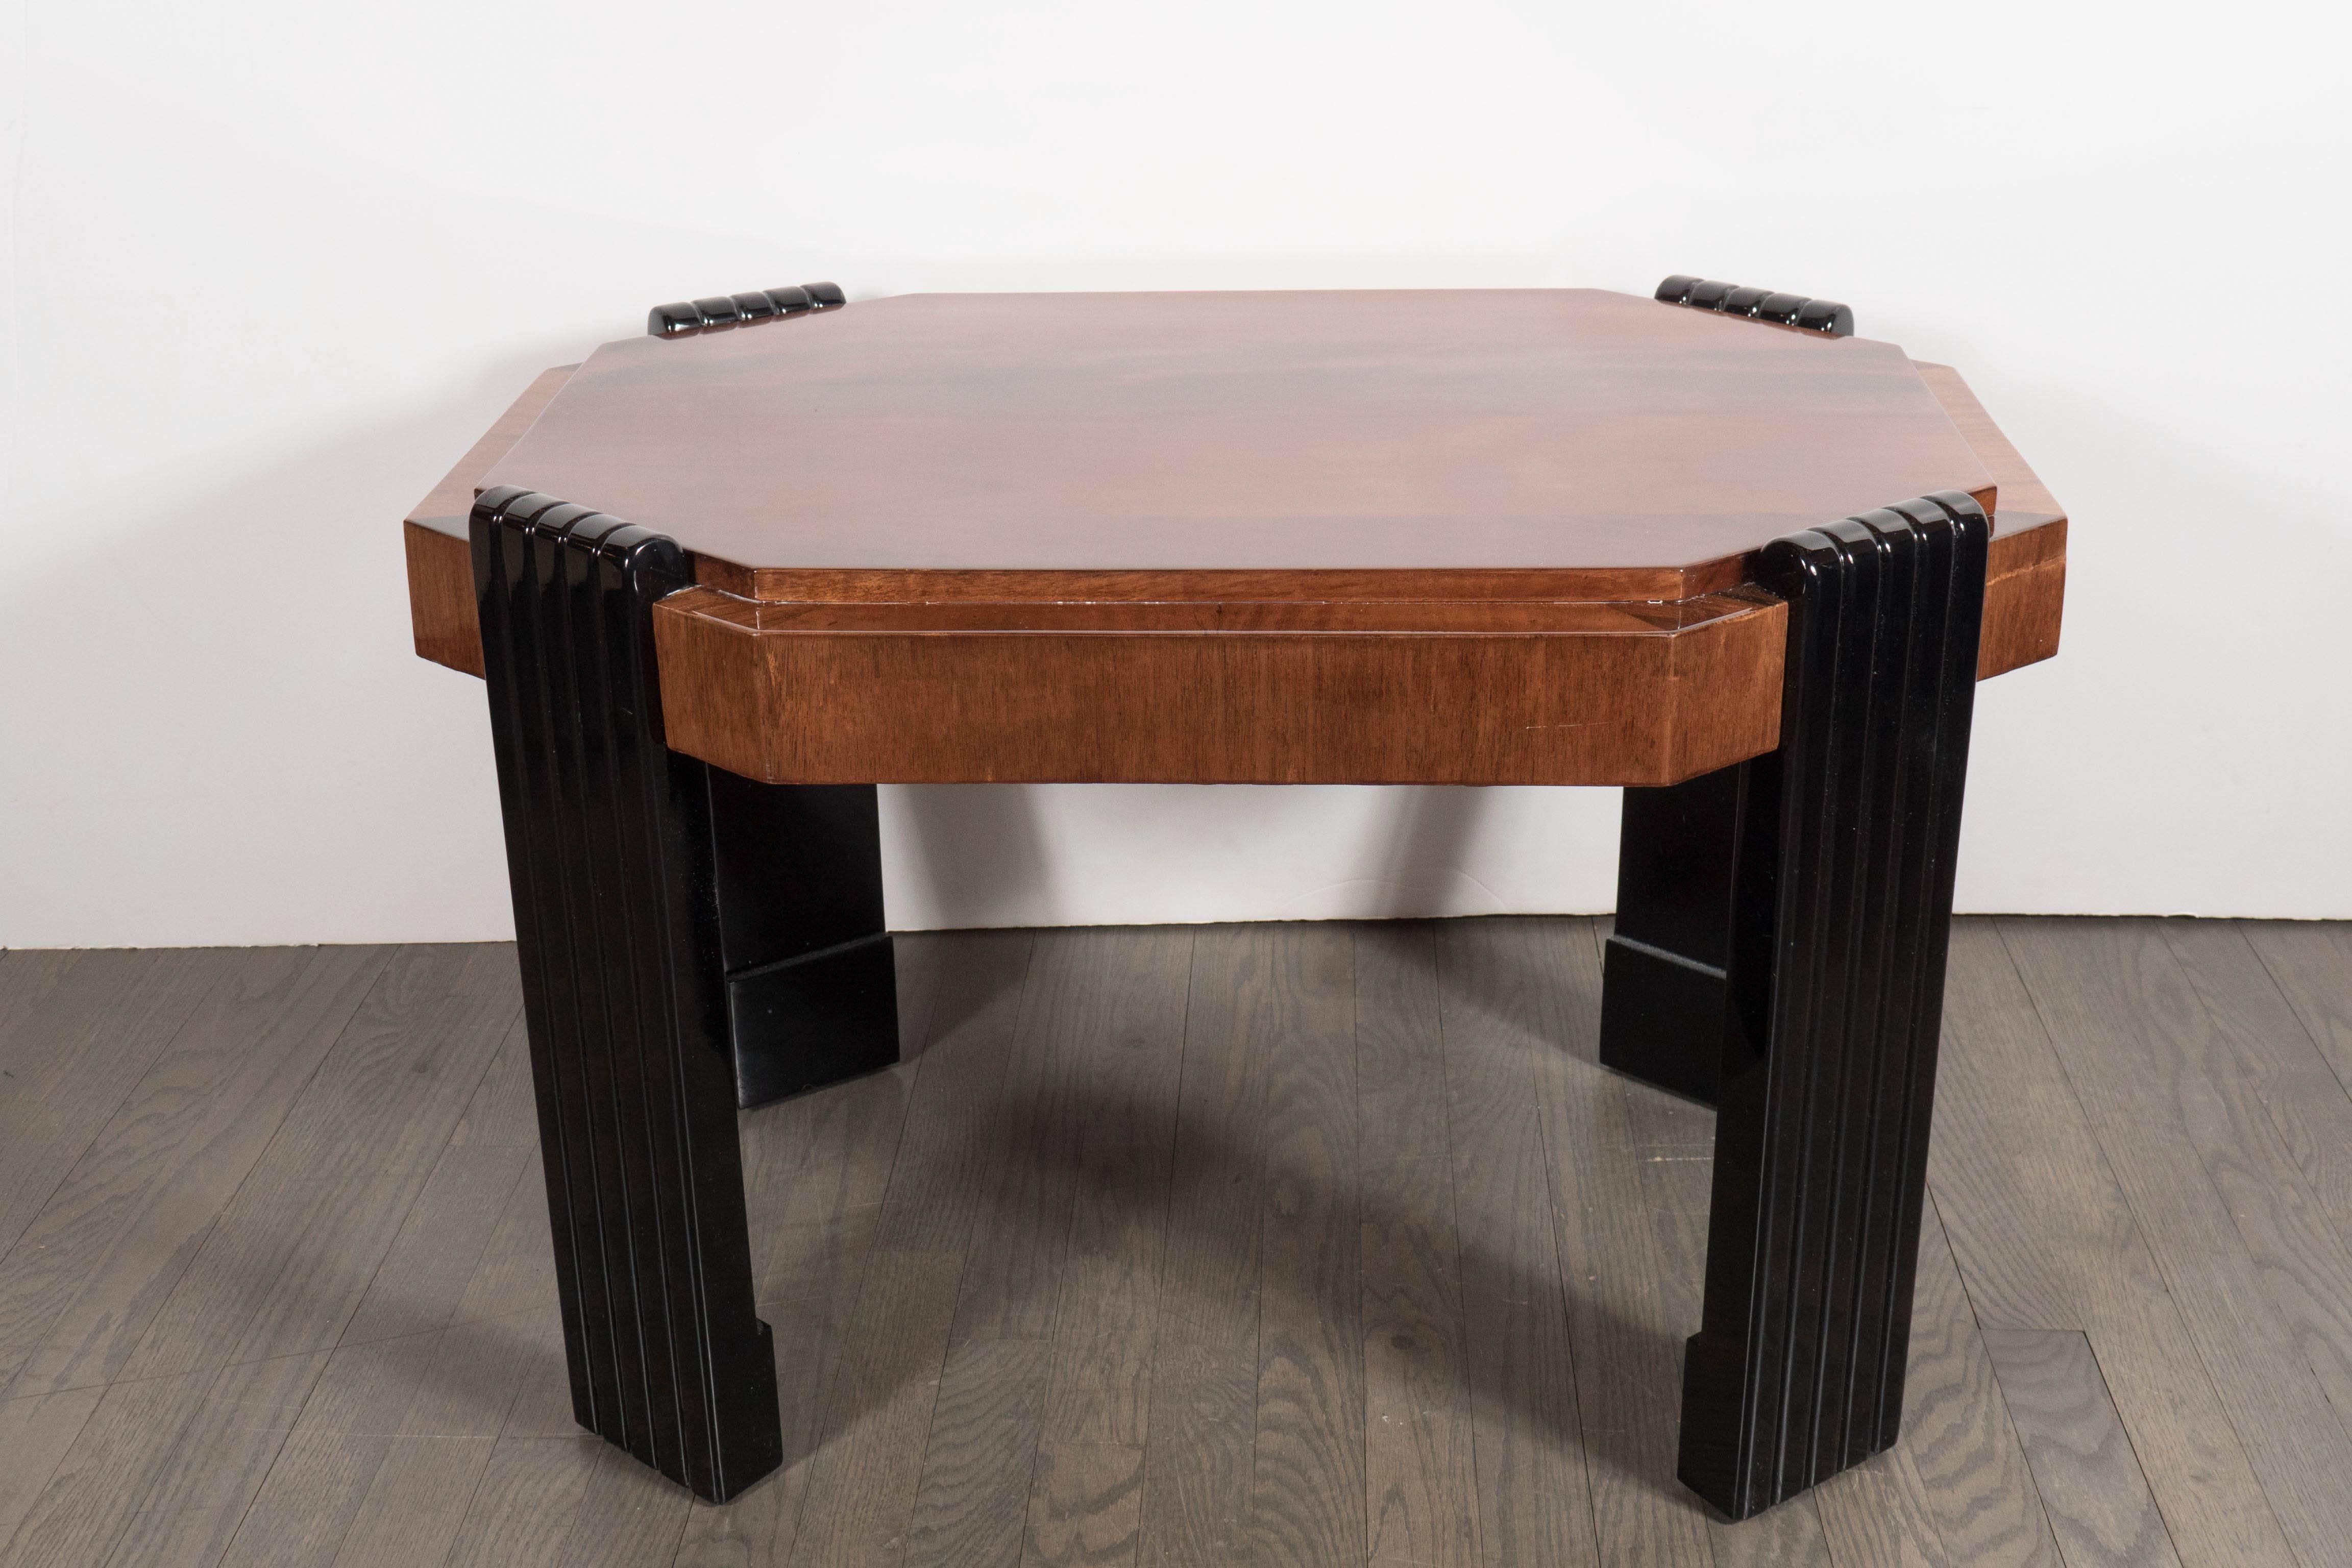 An Art Deco streamlined octagonal occasional table in burled walnut. Bookmatched detailing throughout, the top features a stepped border. Black lacquered legs with curved banded detailing support the piece. It has been restored to mint condition.